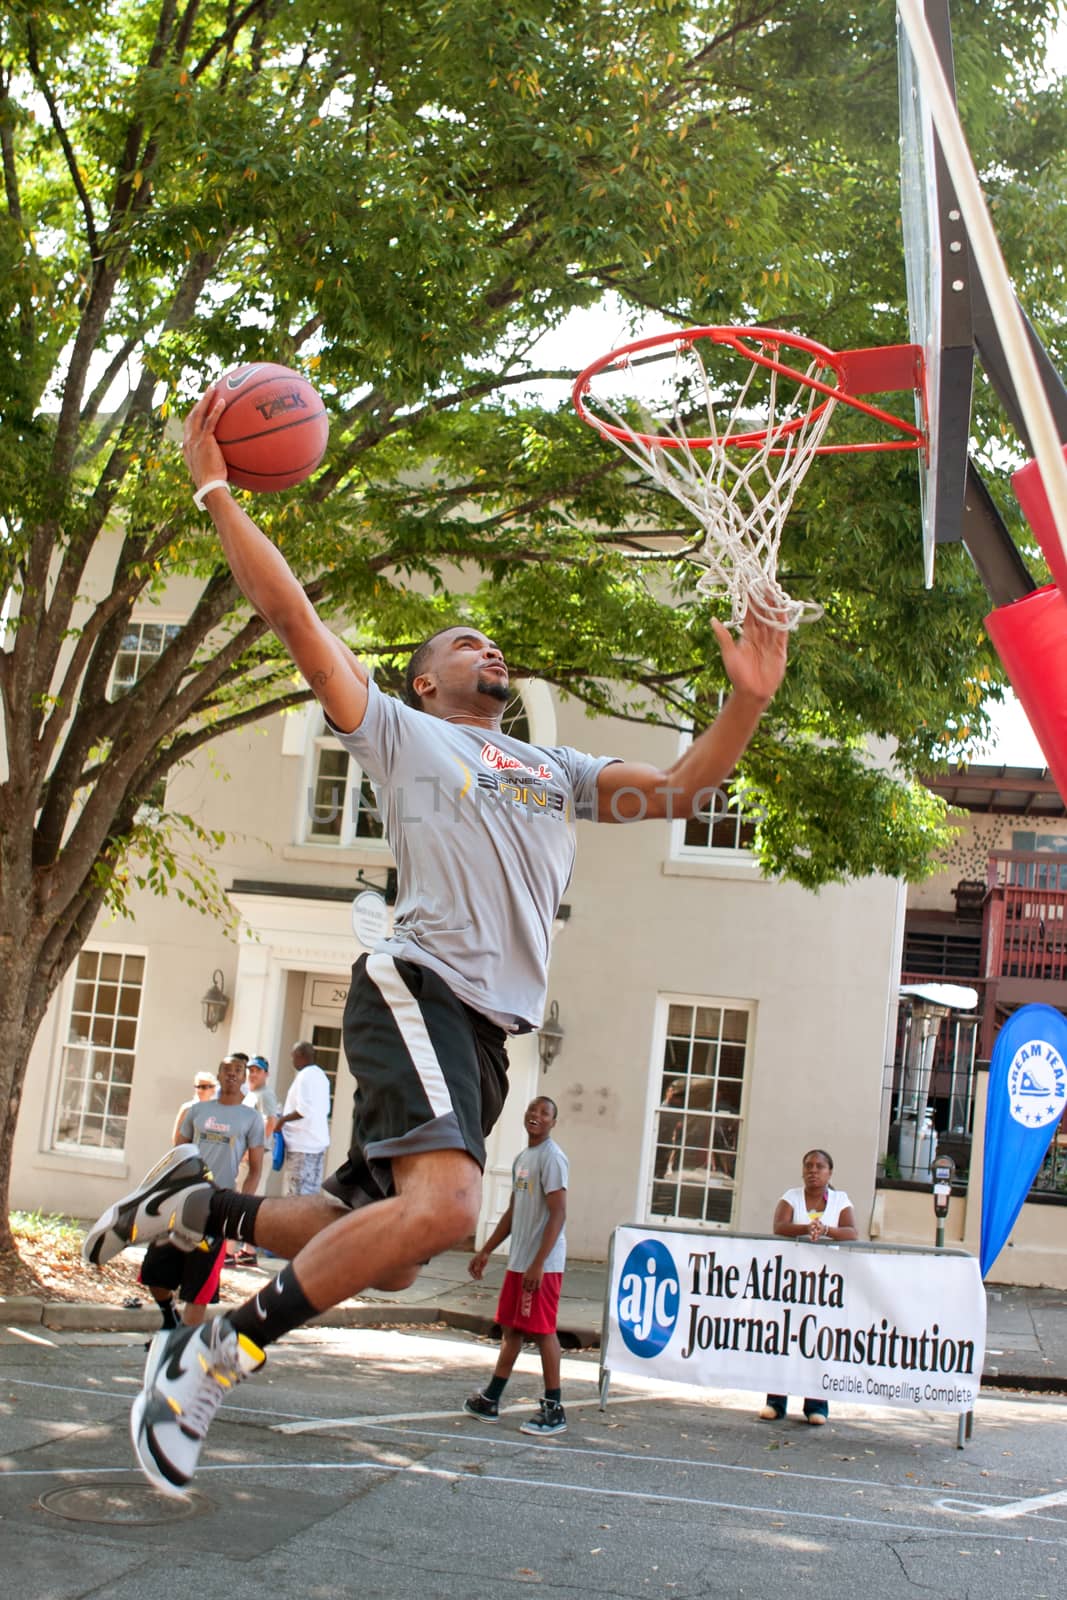 Athens, GA, USA - August 24, 2013:  A young man jumps to slam dunk the basketball in an impromptu dunk competition, in between games at a 3-on-3 basketball tournament held in the streets of downtown Athens.